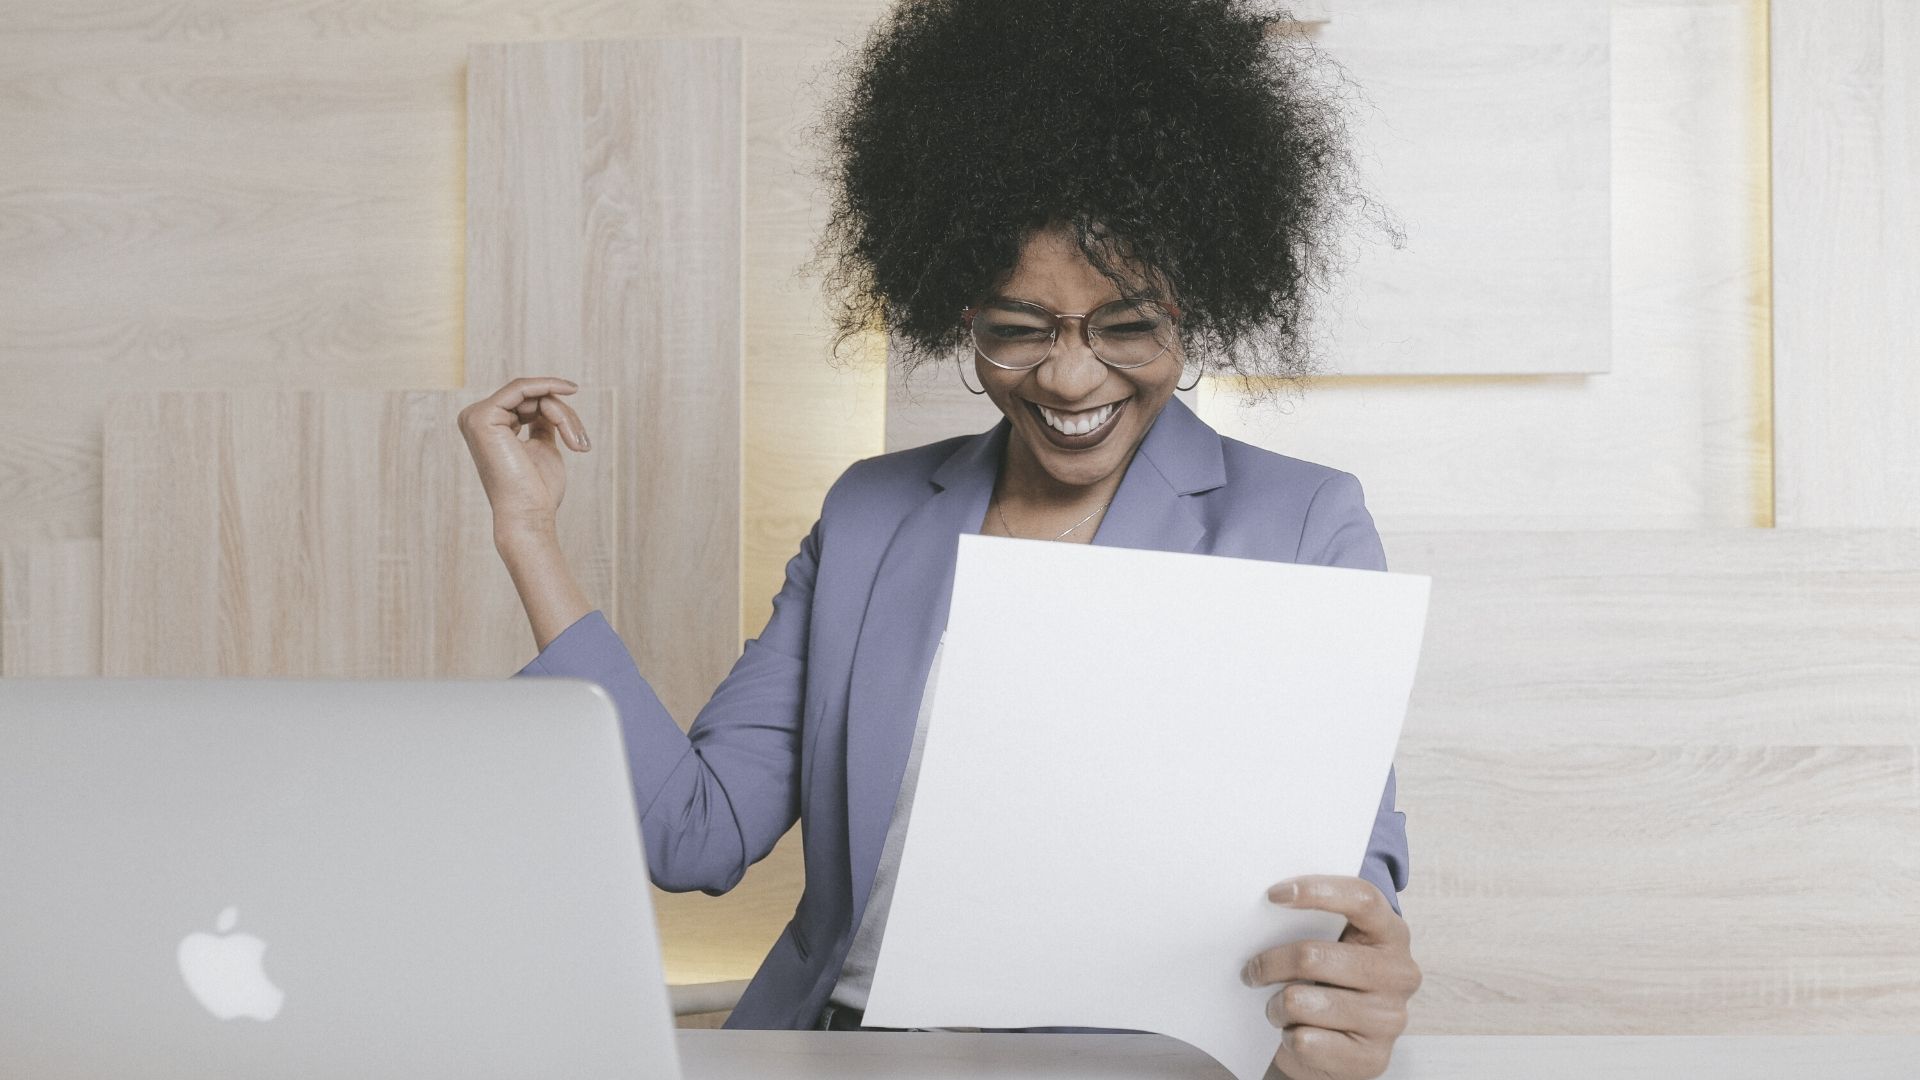 Woman Enjoying the Positive Energy of Achieving Her Goals